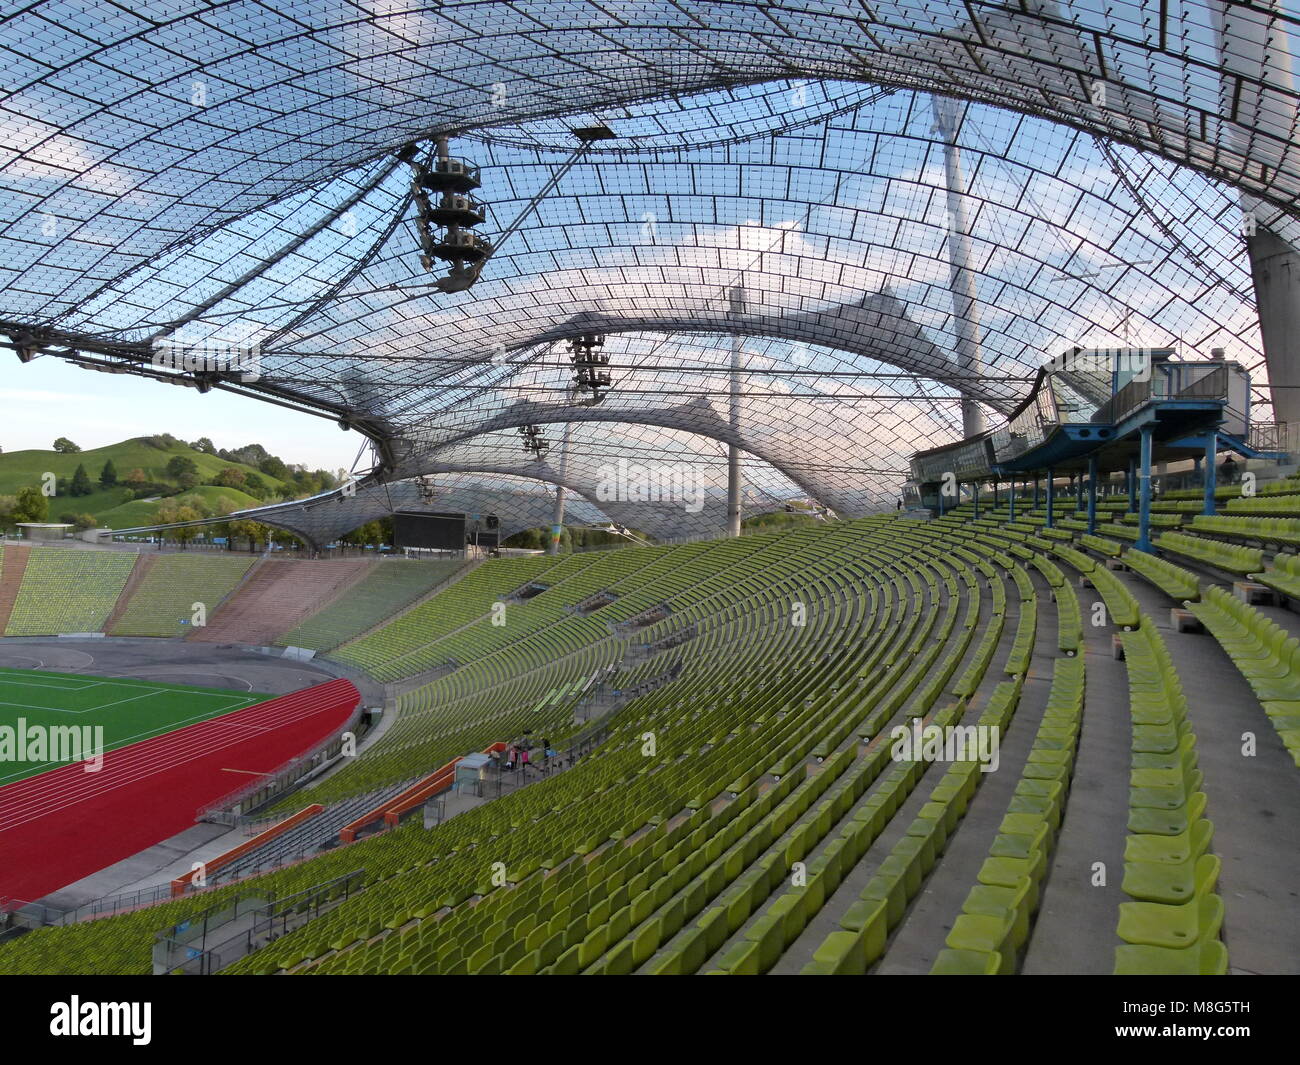 Canada: Retractable roof not right for the Olympic Stadium